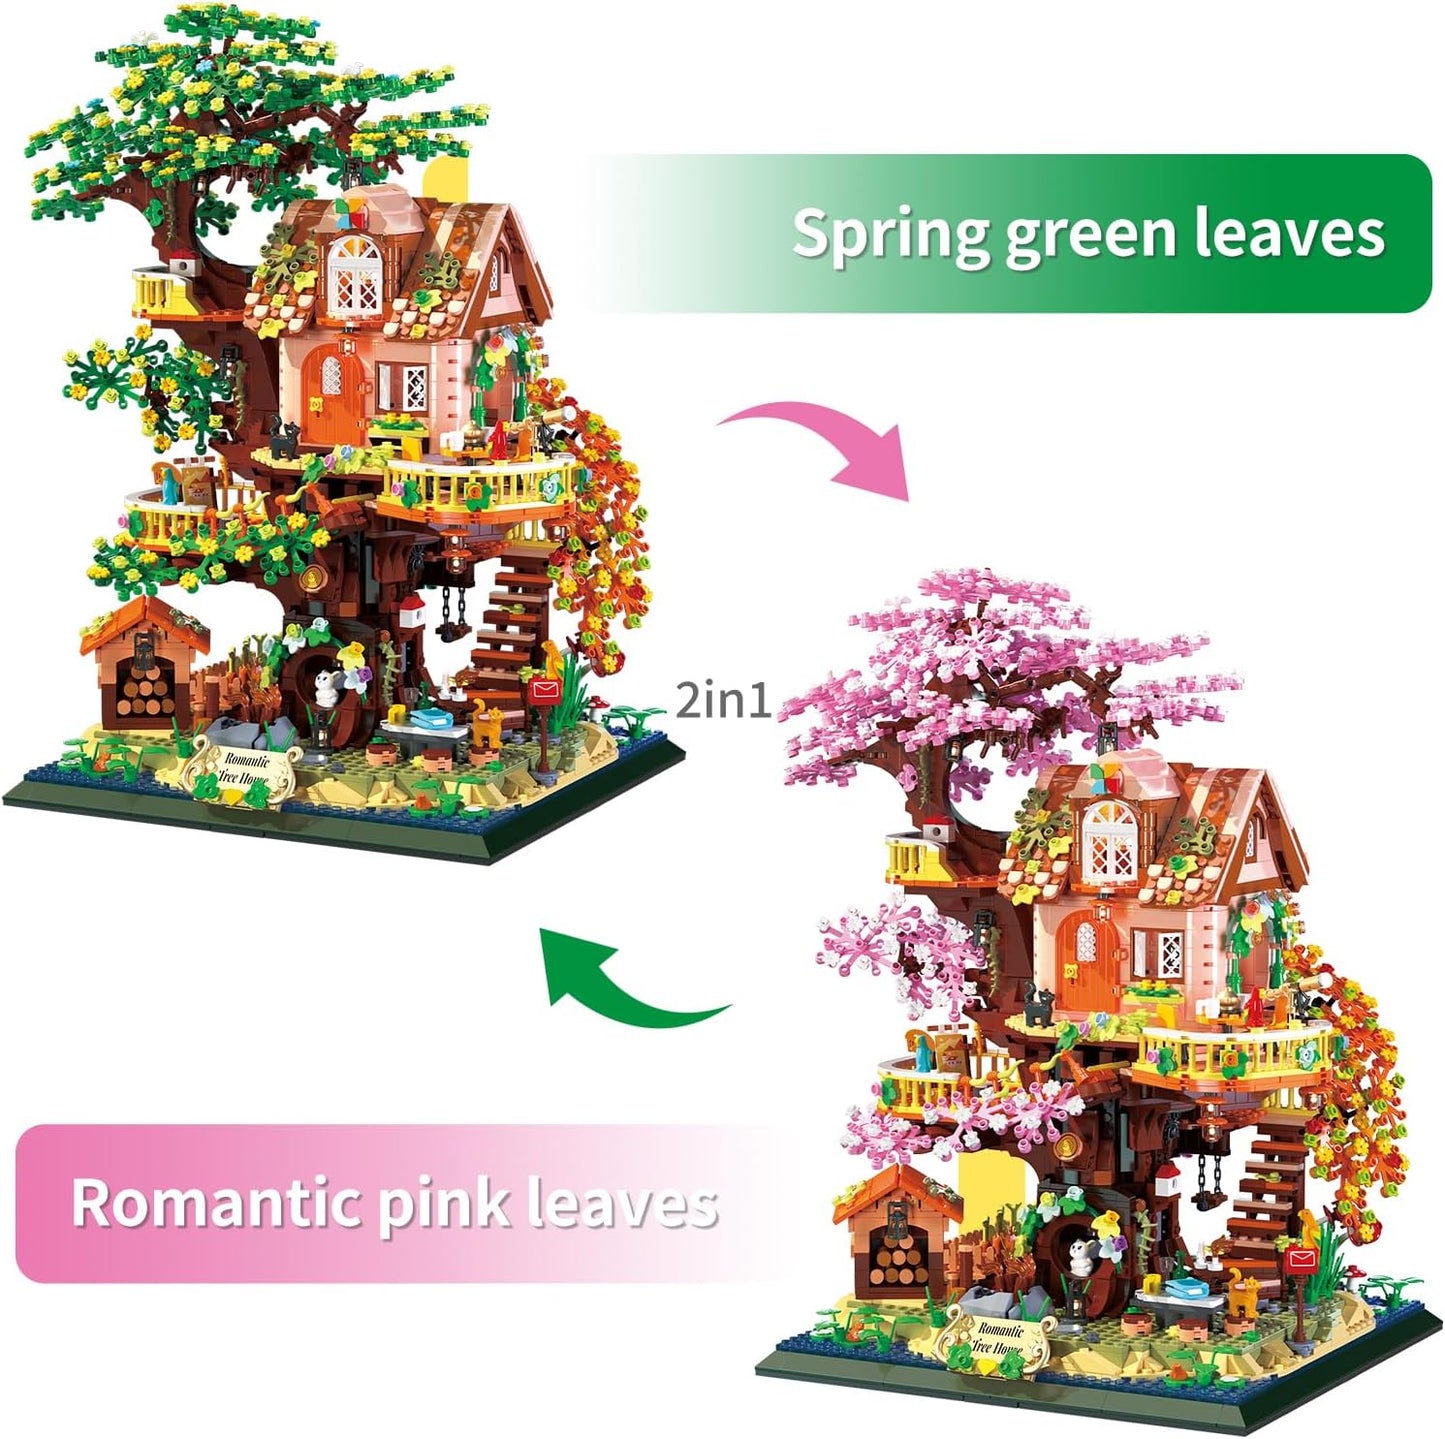 2 in 1 Tree House Building Block, 3196PCS Mini Building Sets, Not Compatible with Lego Treehouse, Model Construction Set for 14 Plus Year Olds & Adults